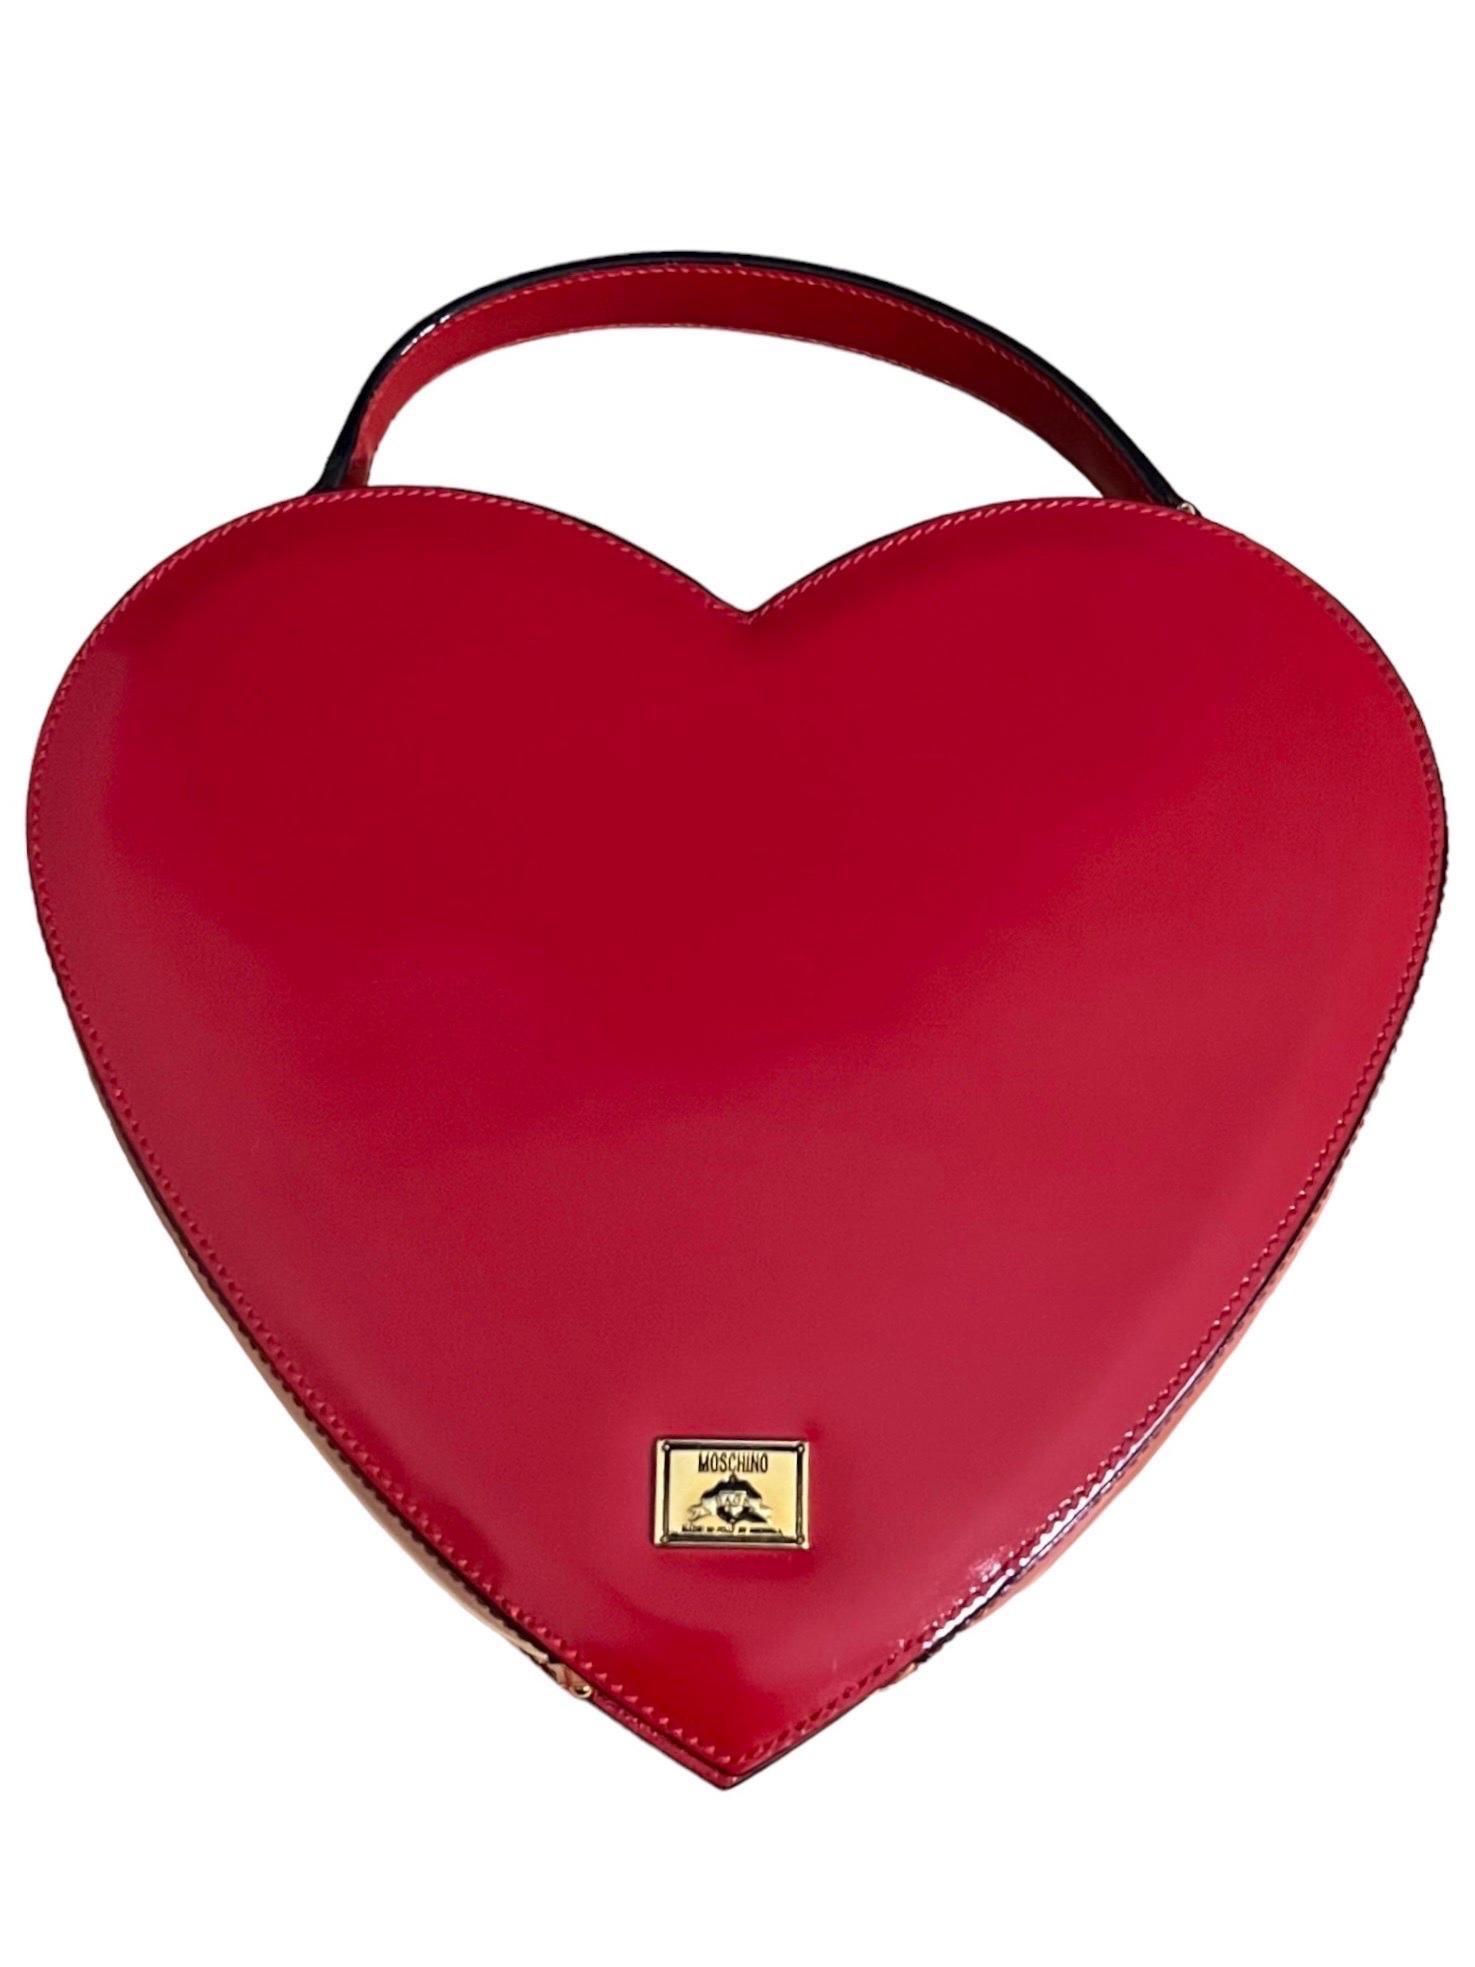 Moschino Vintage Red Leather Heart Bag The Nanny 5